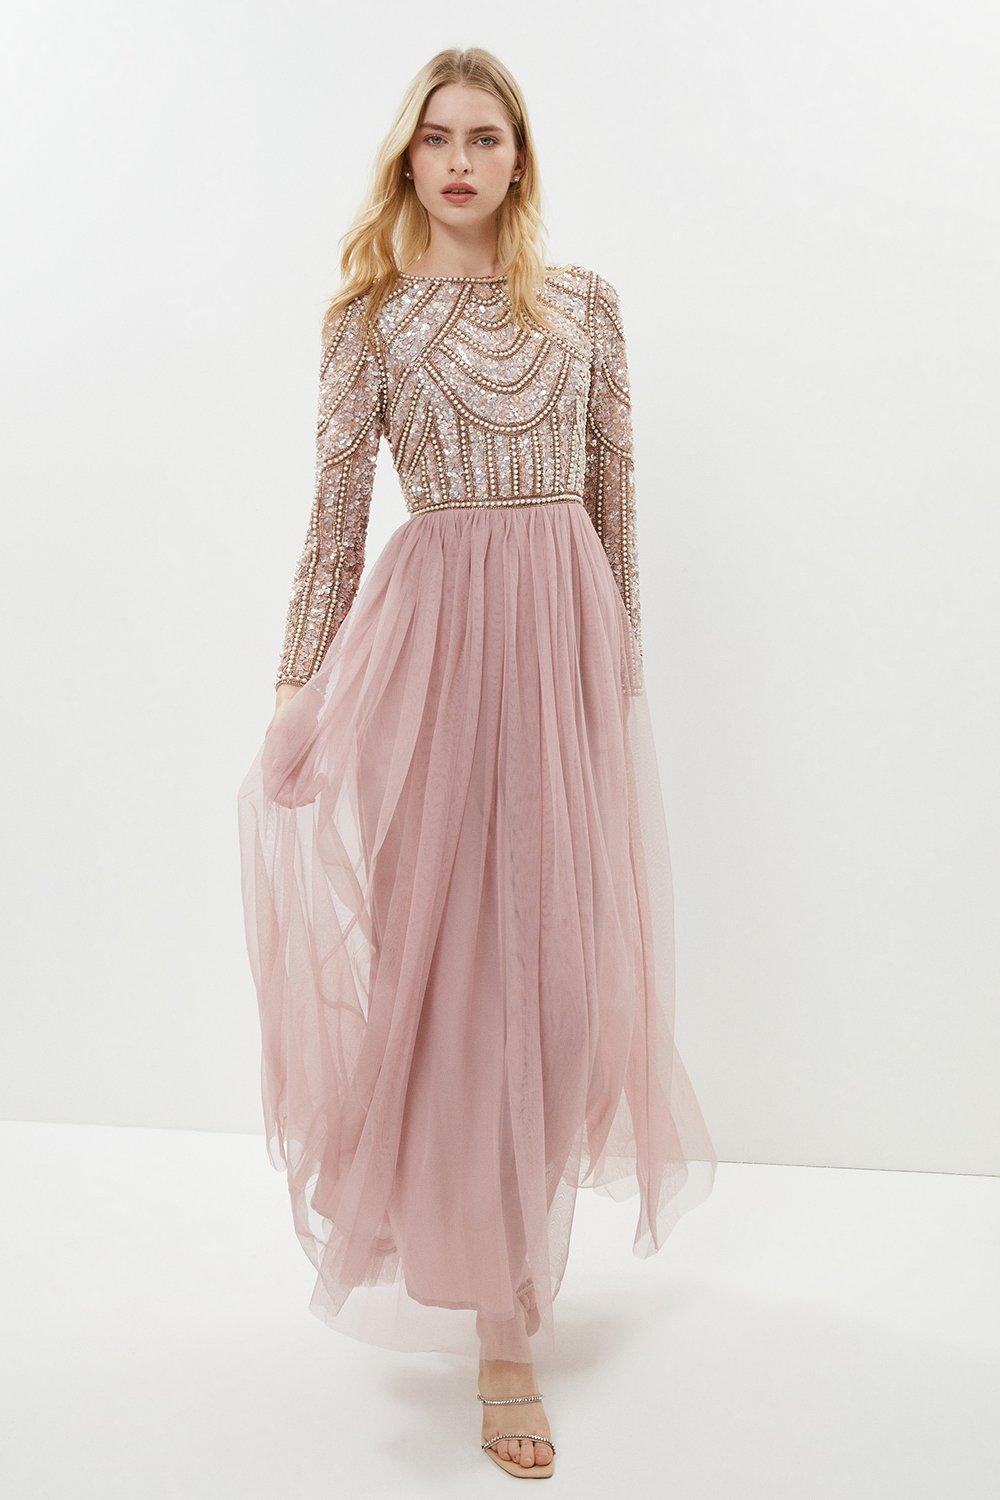 Pearl Embellished Bodice Bridesmaids Tulle Skirt Dress